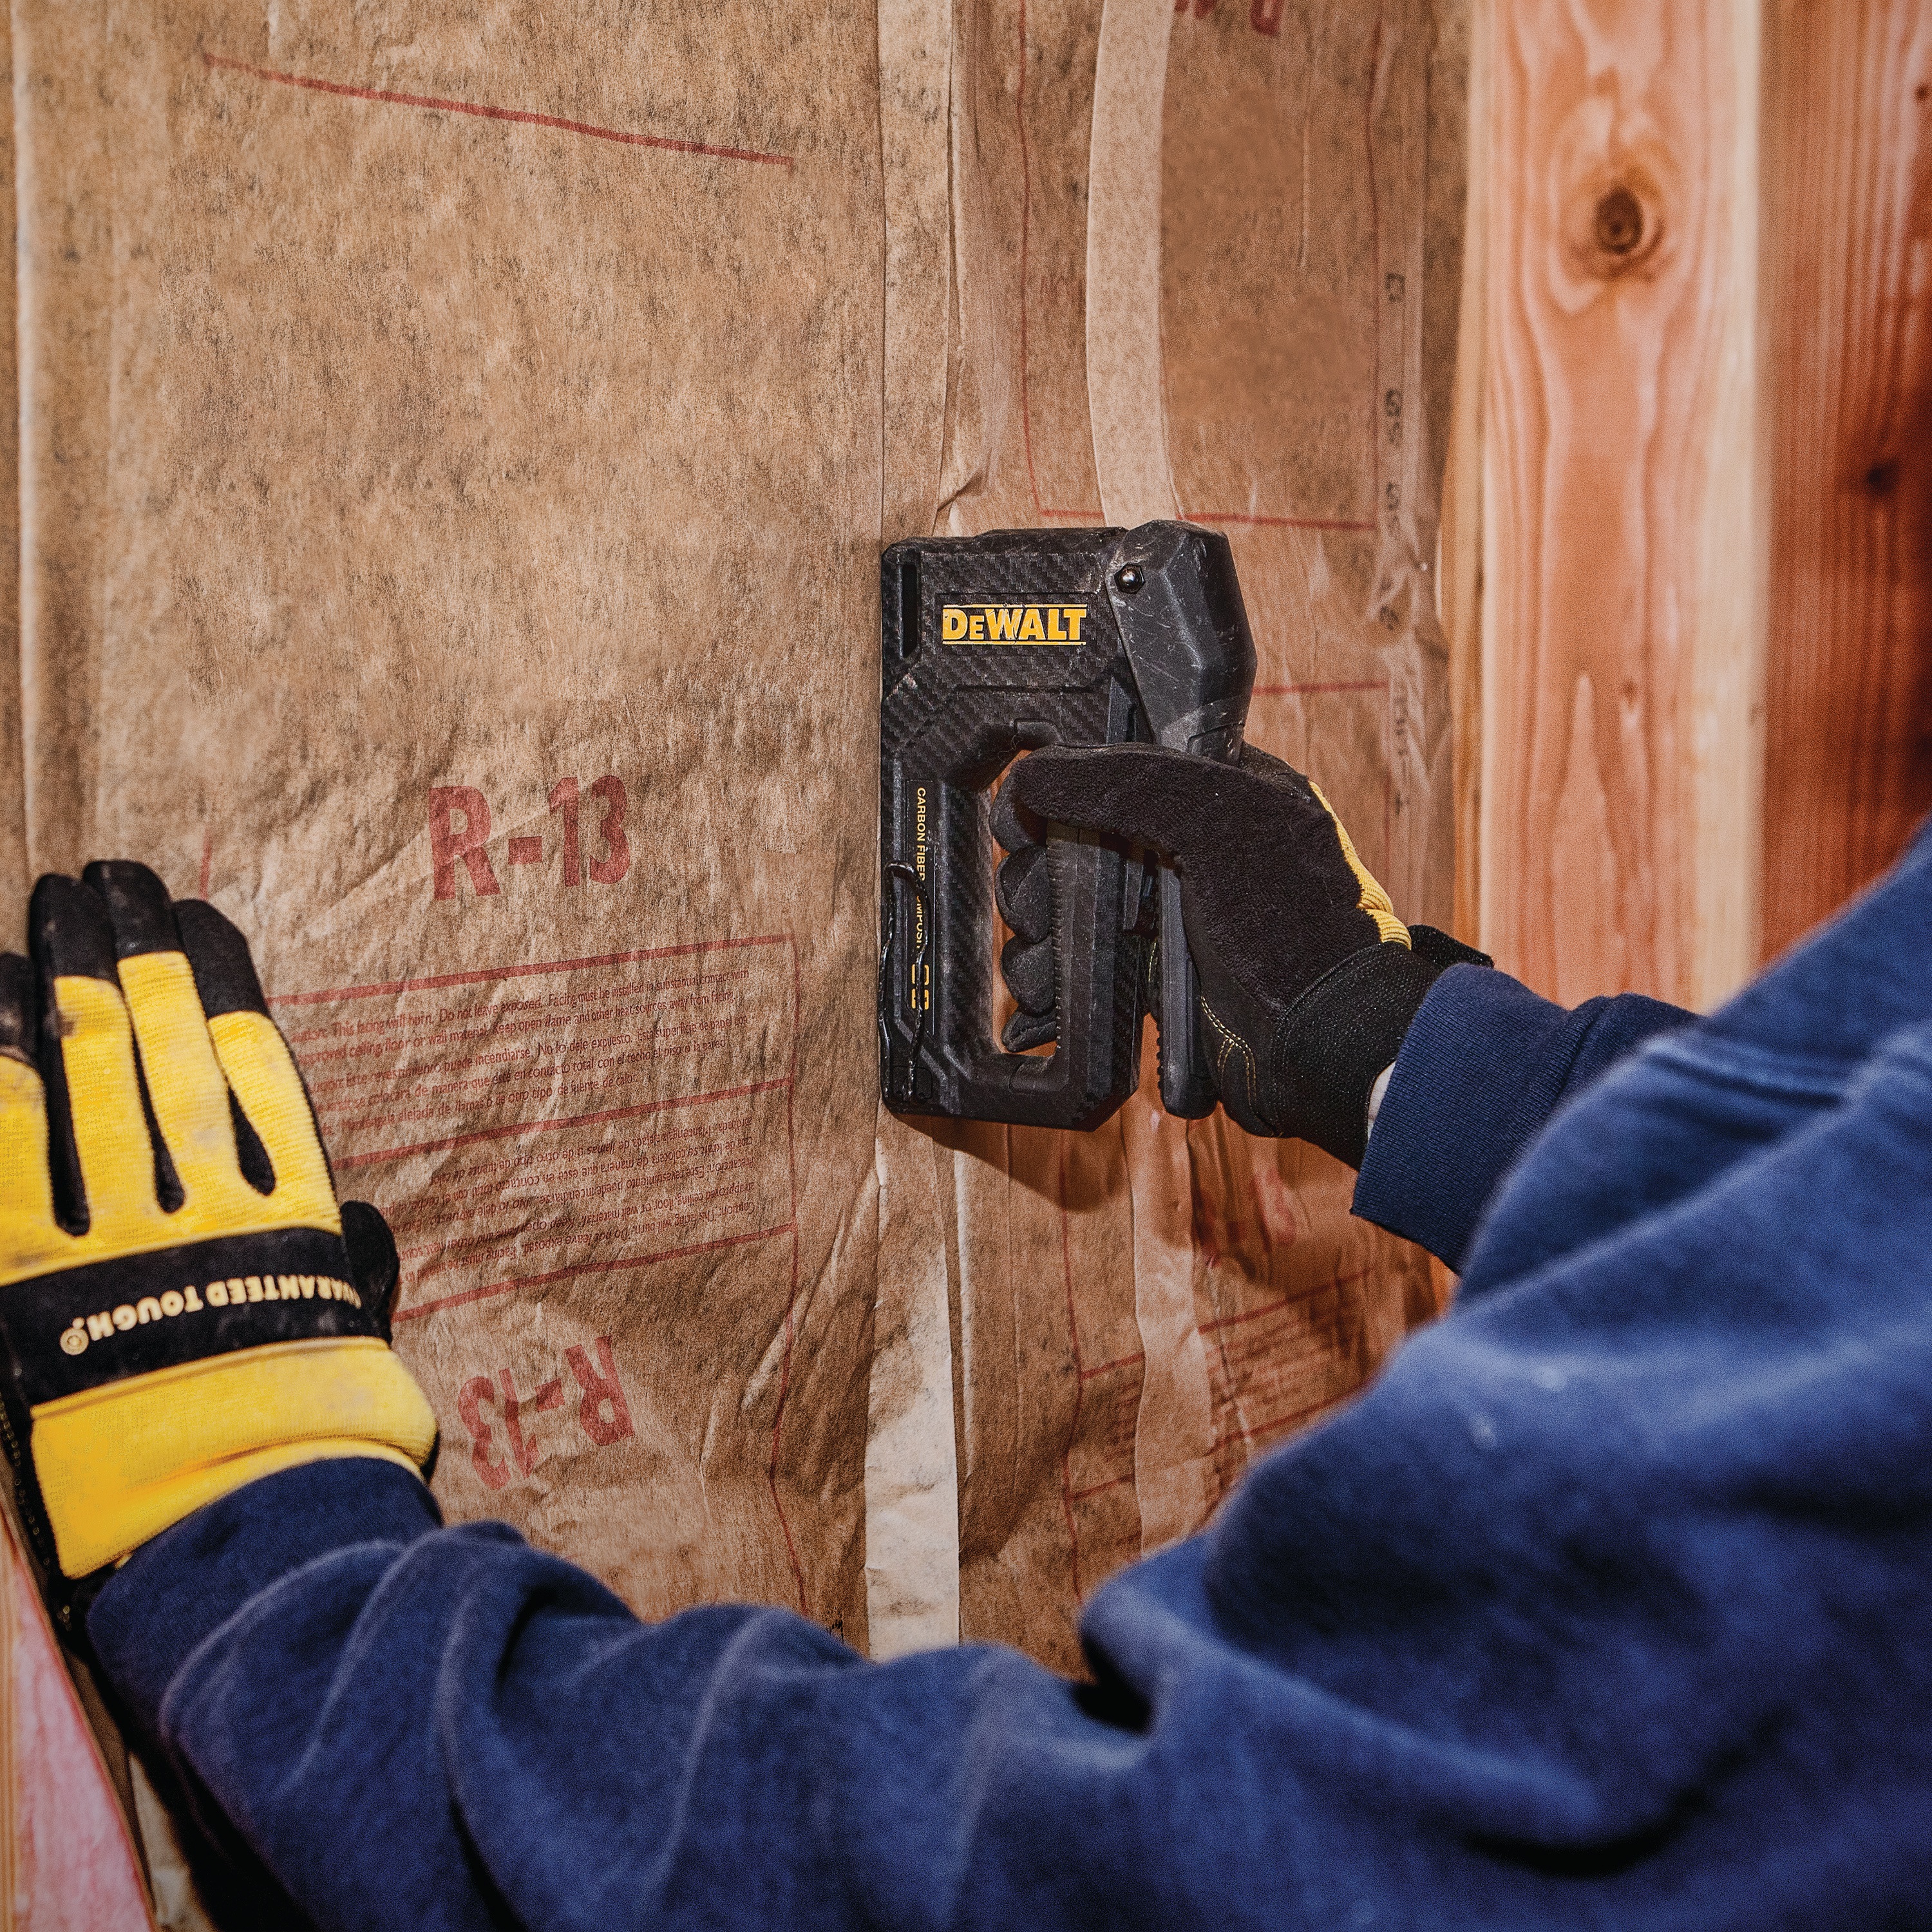 Carbon Fiber Composite Staple Gun being used to staple underlay on  wall.